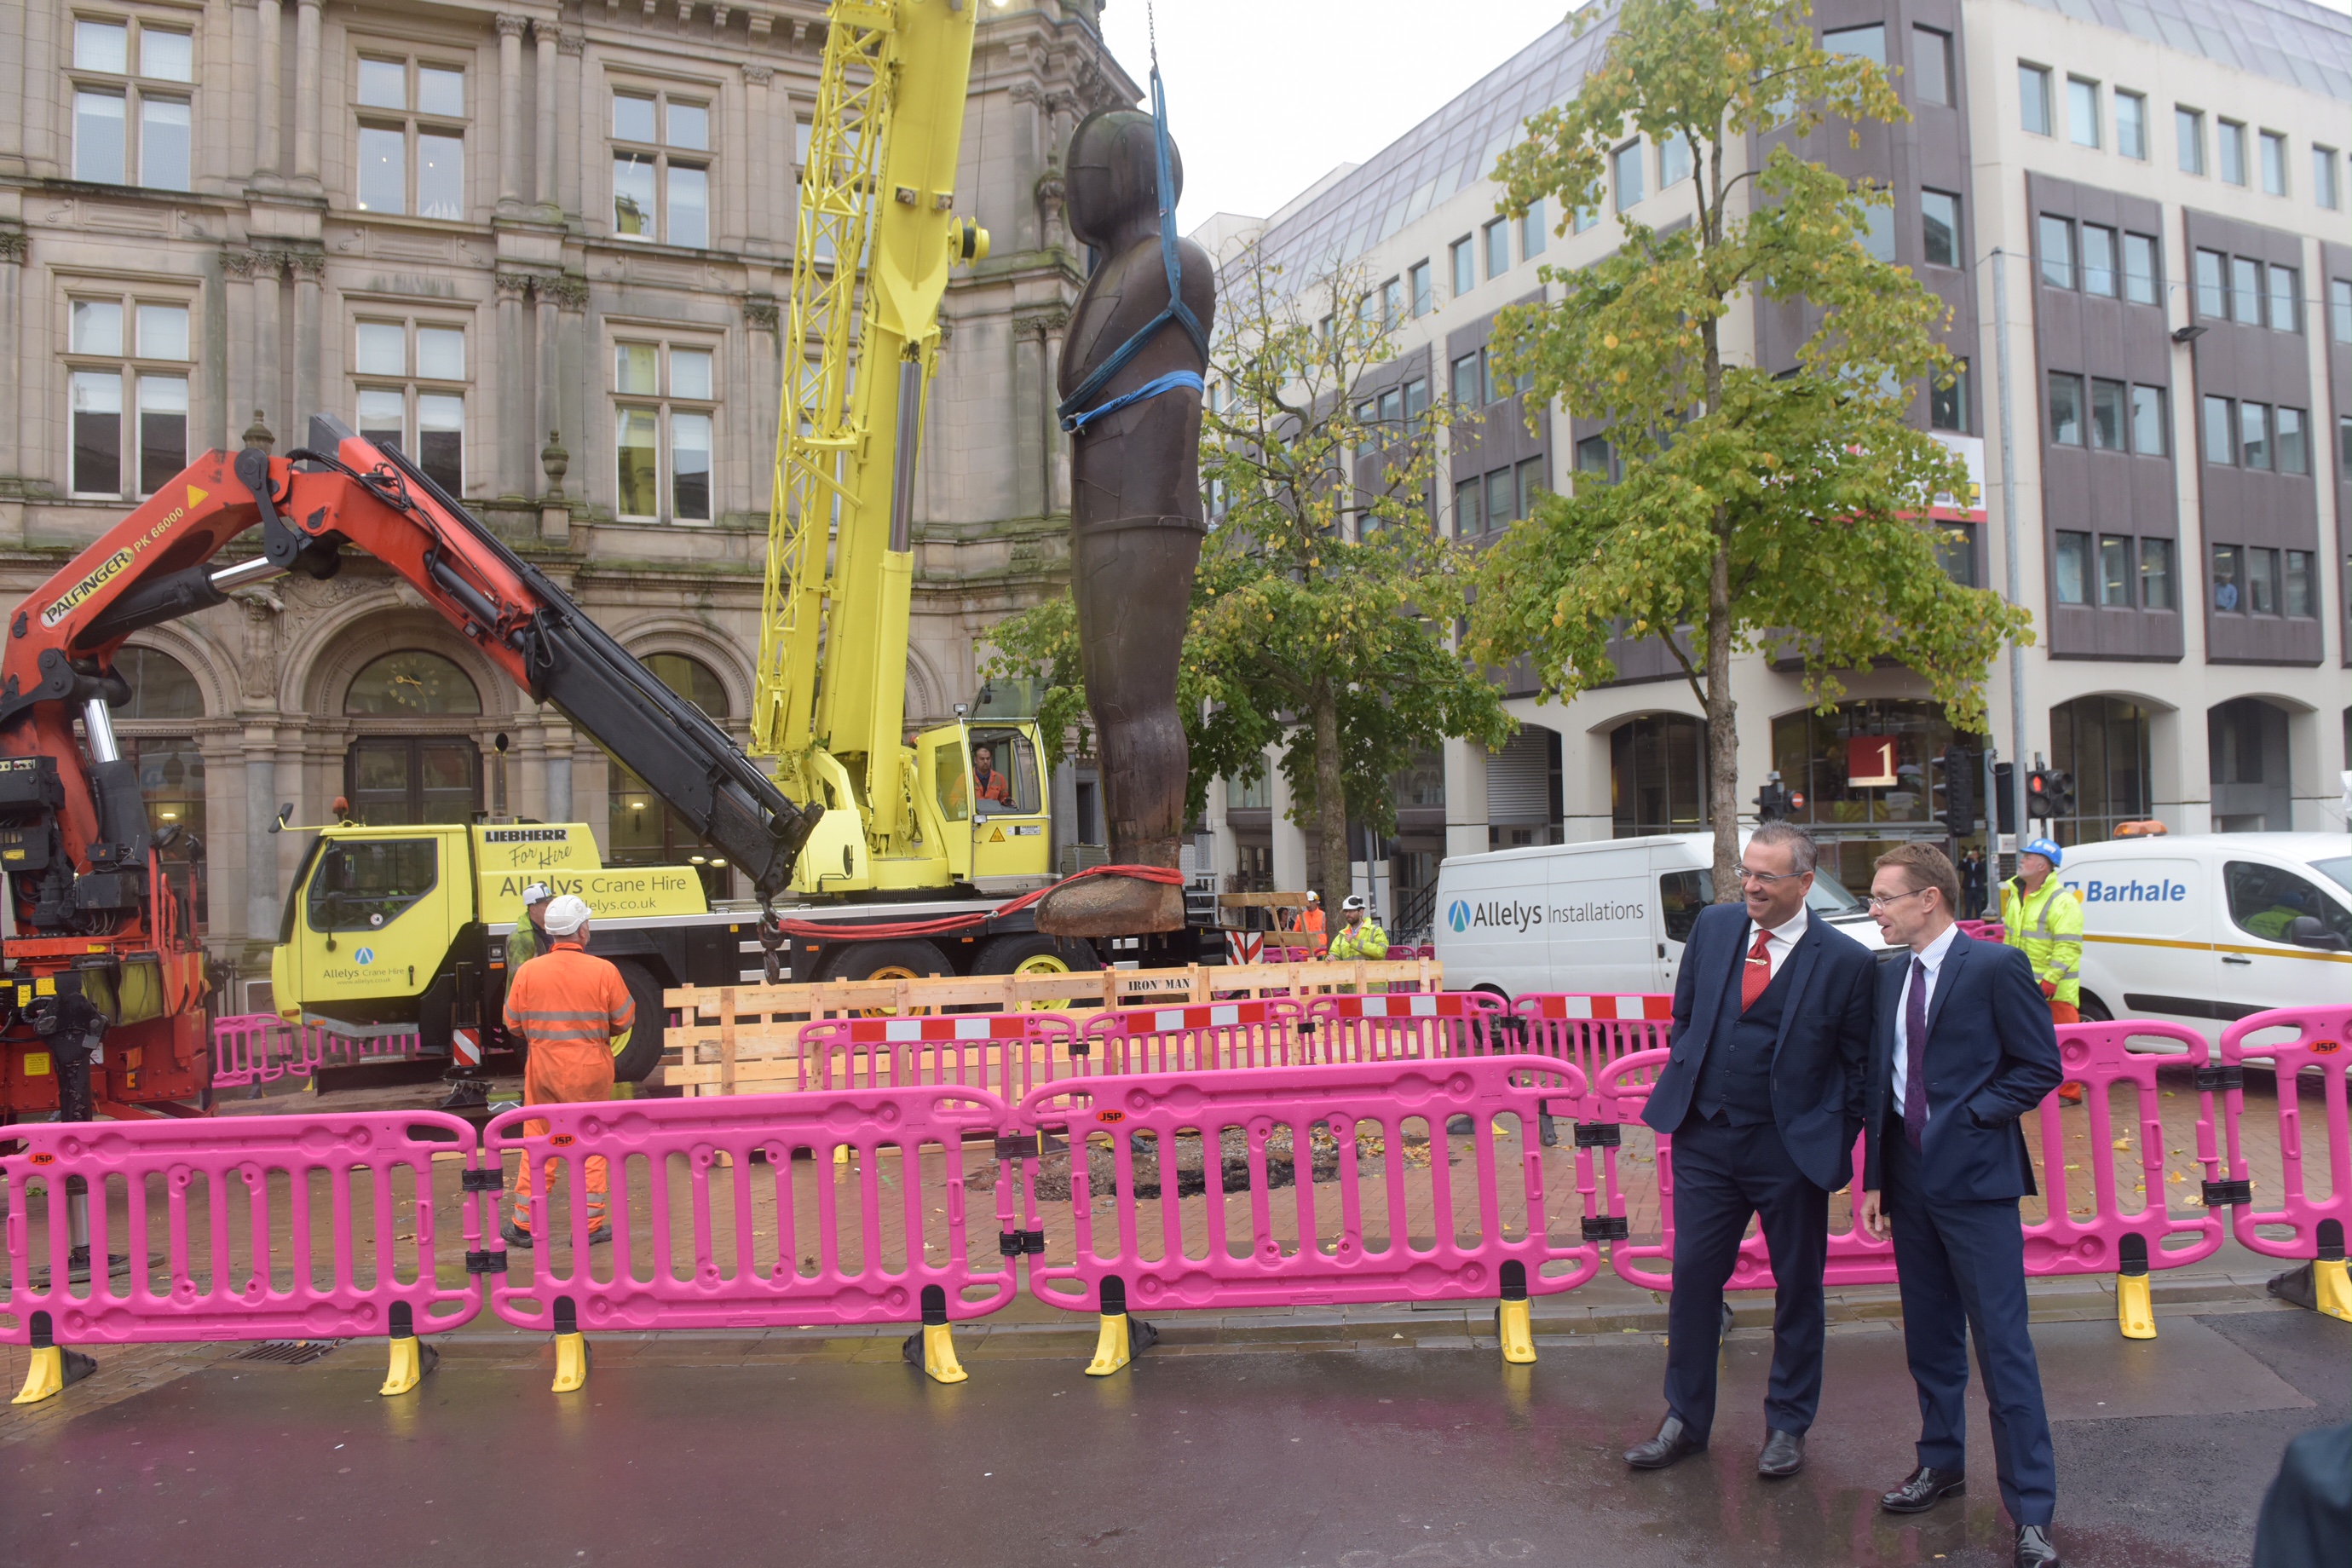 Lift Off: Mayor for the West Midlands Andy Street and Cllr John Clancy, leader of Birmingham City Council, oversee the raising of the Iron; Man statue as work on the next expansion of the Midland Metro is officially launched.